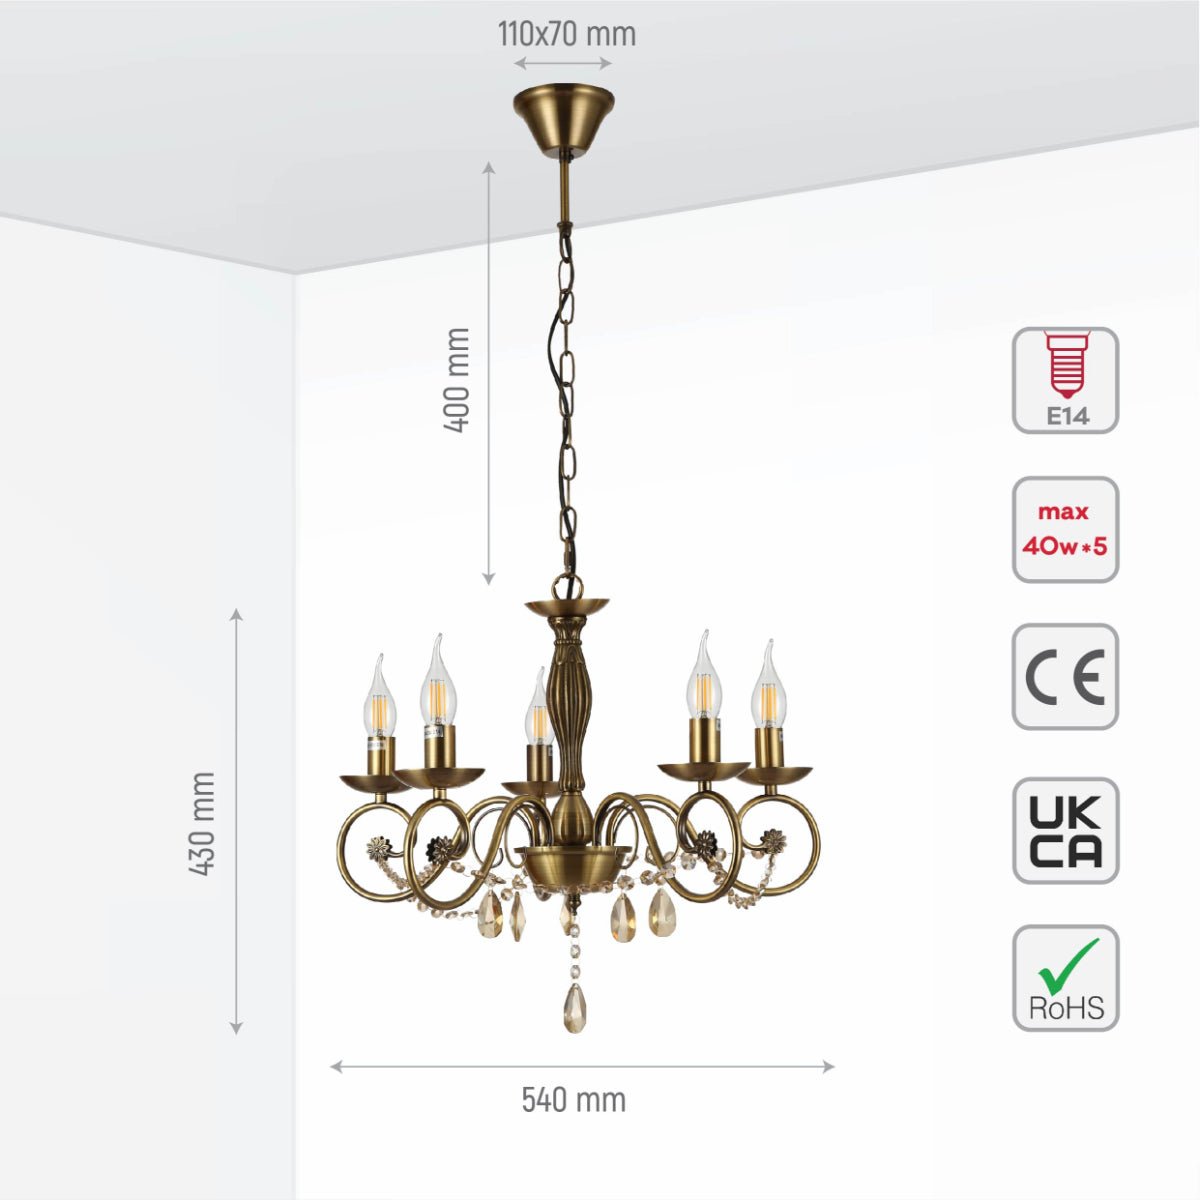 Size and specs of Antique Brass Finishing Metal Body French Candle Vintage Crystal Ceiling Light with E14 | TEKLED 152-179536